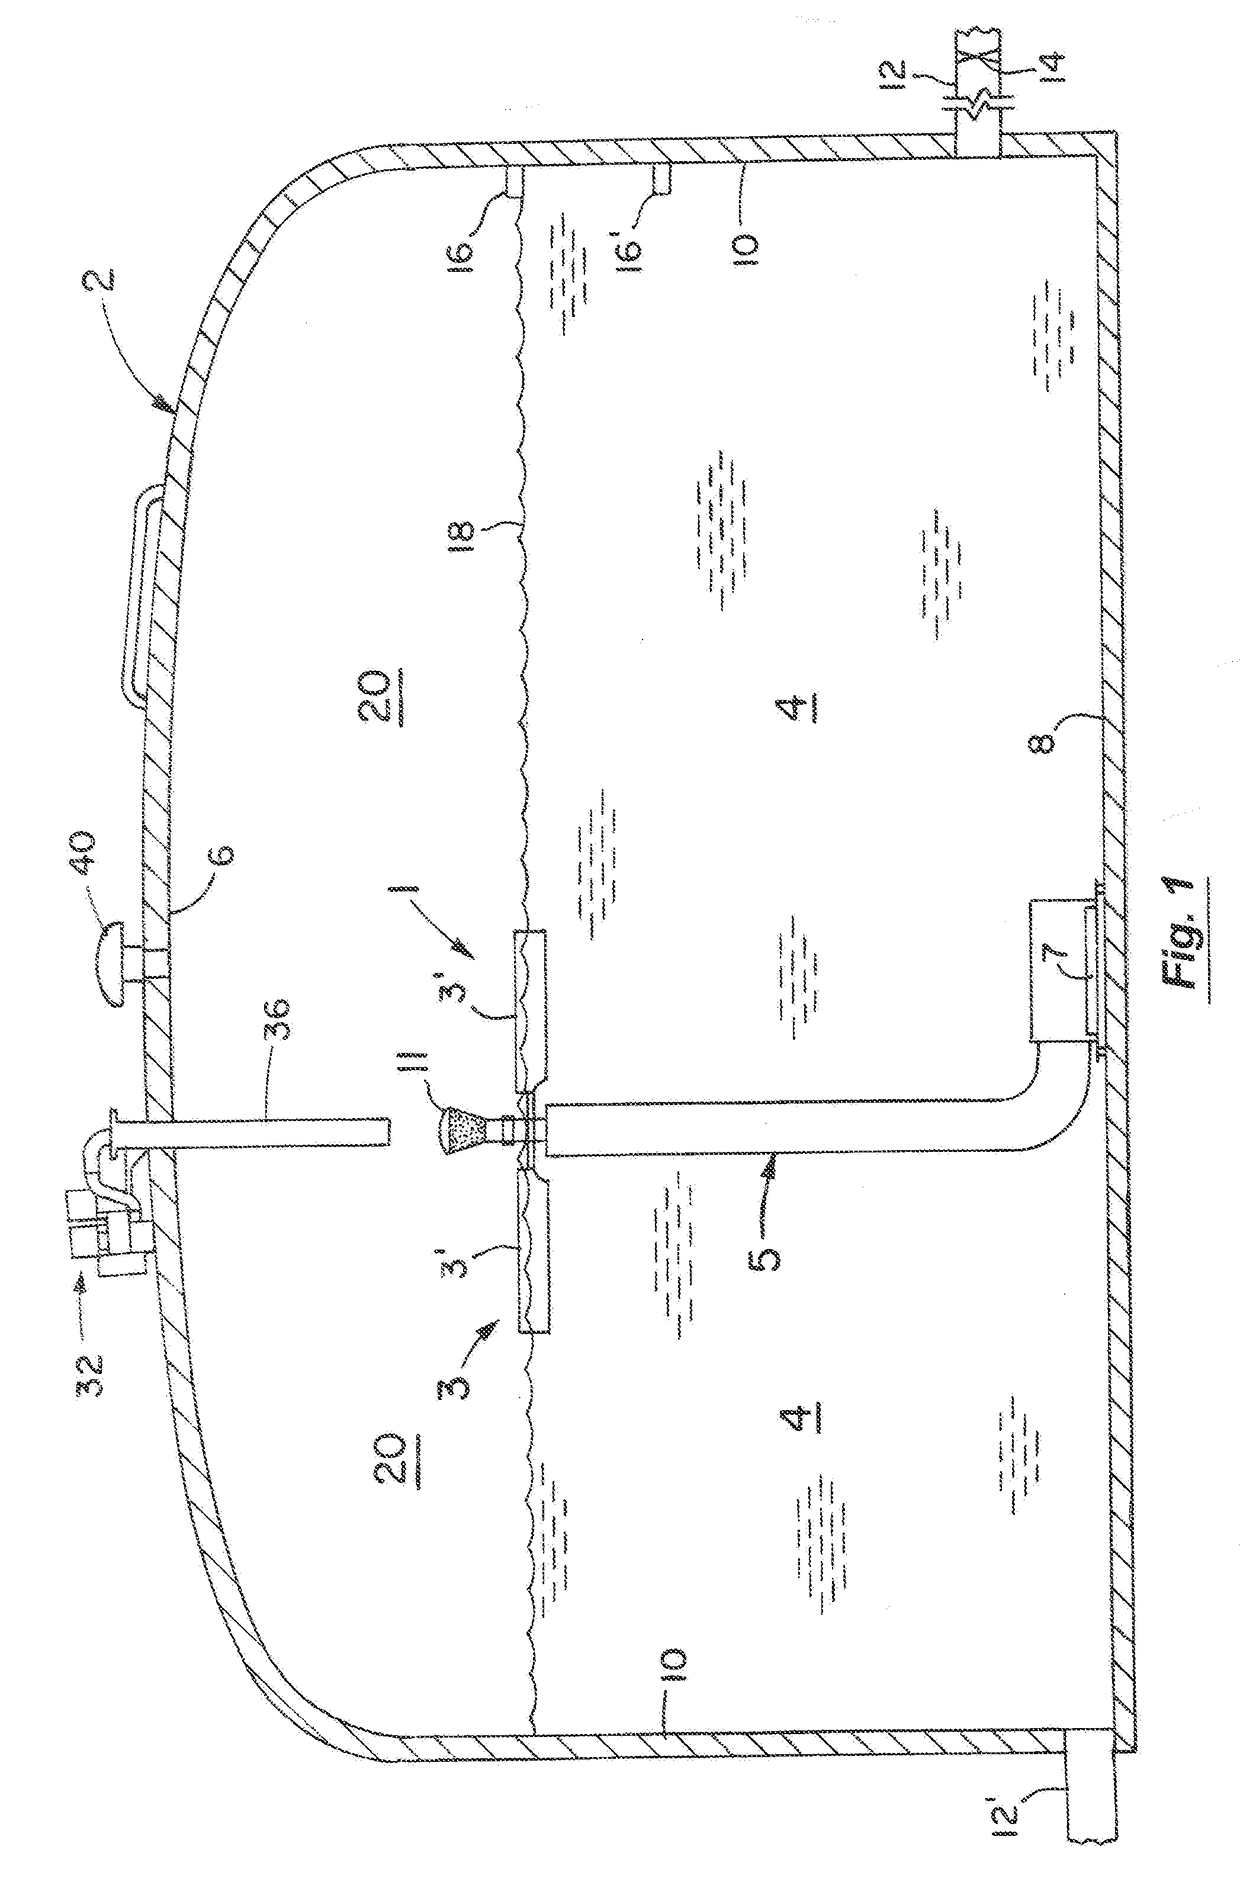 Method and apparatus for treating potable water in municipal and similar water tanks